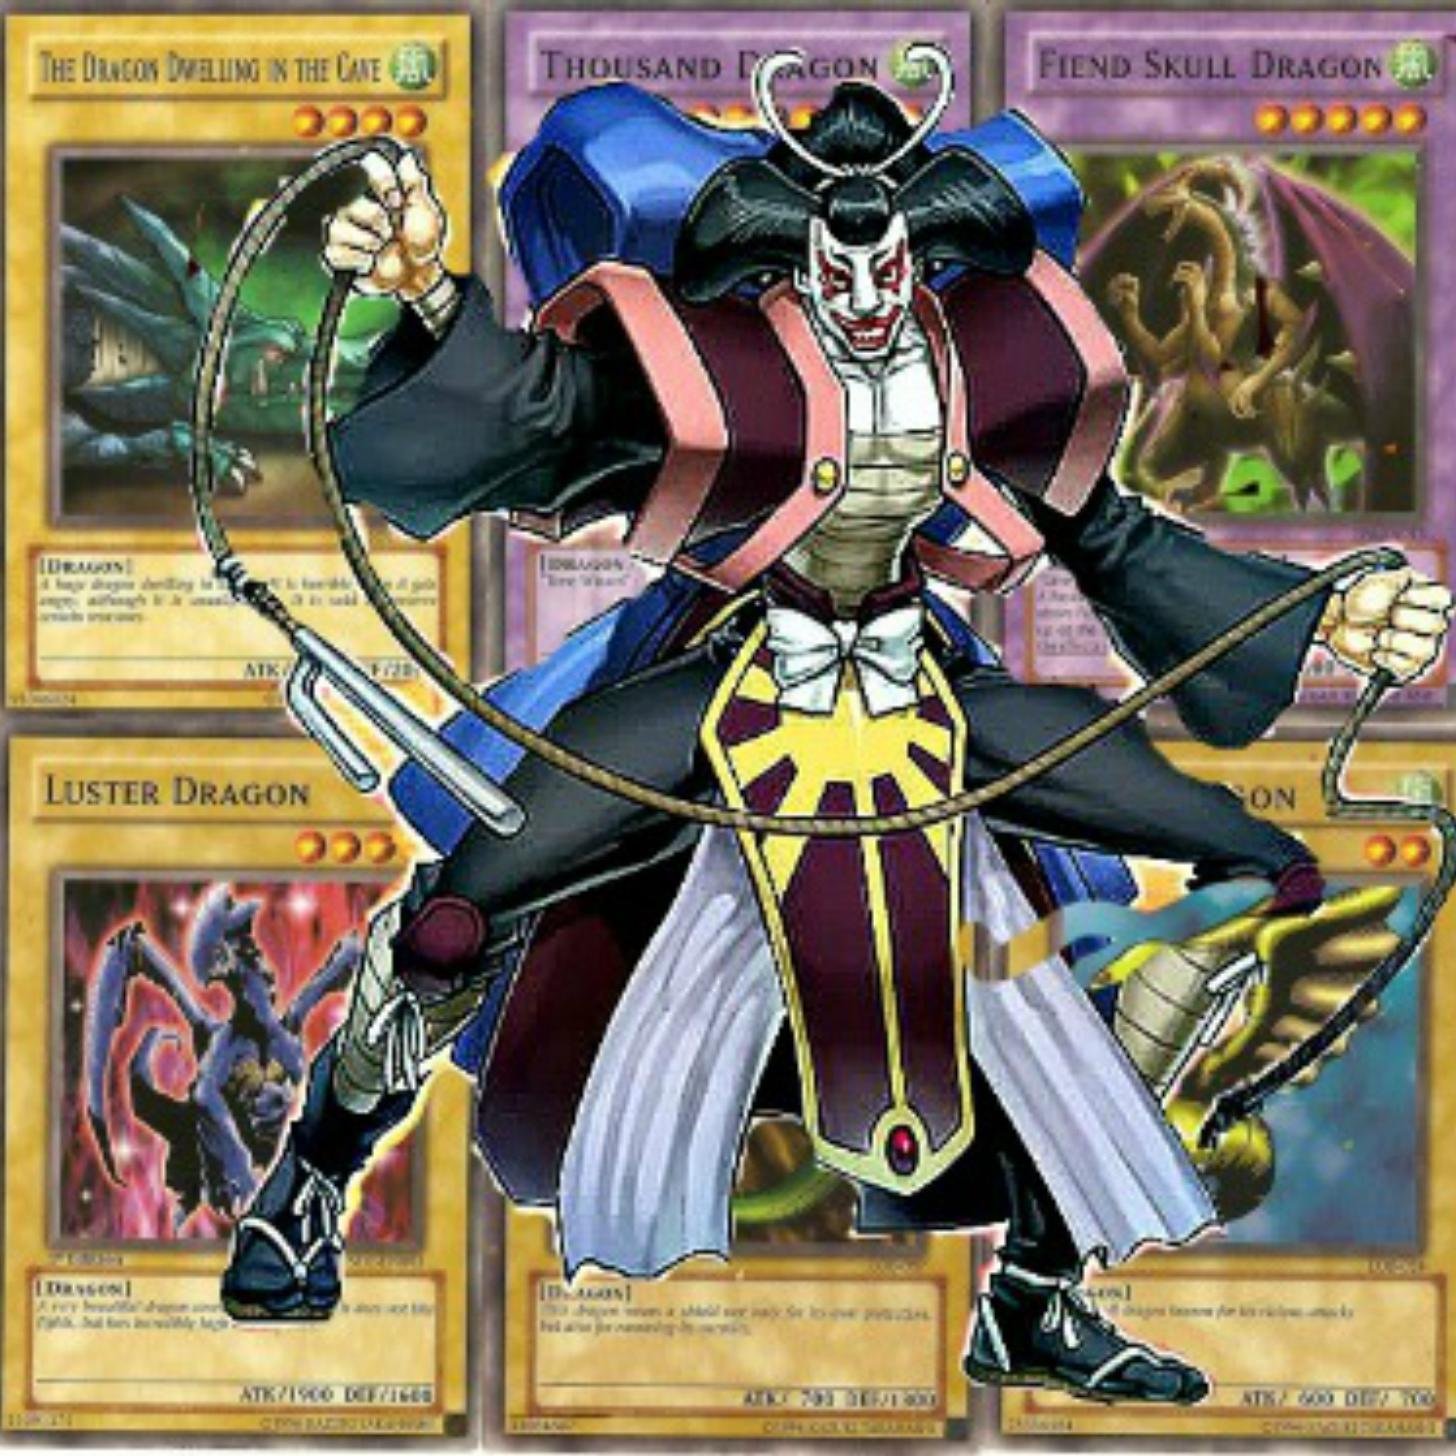 Hey guys this is generationyugioh my name is adam and if you guys would like to know more about my channel here is the link https://t.co/RiBnNQISf3